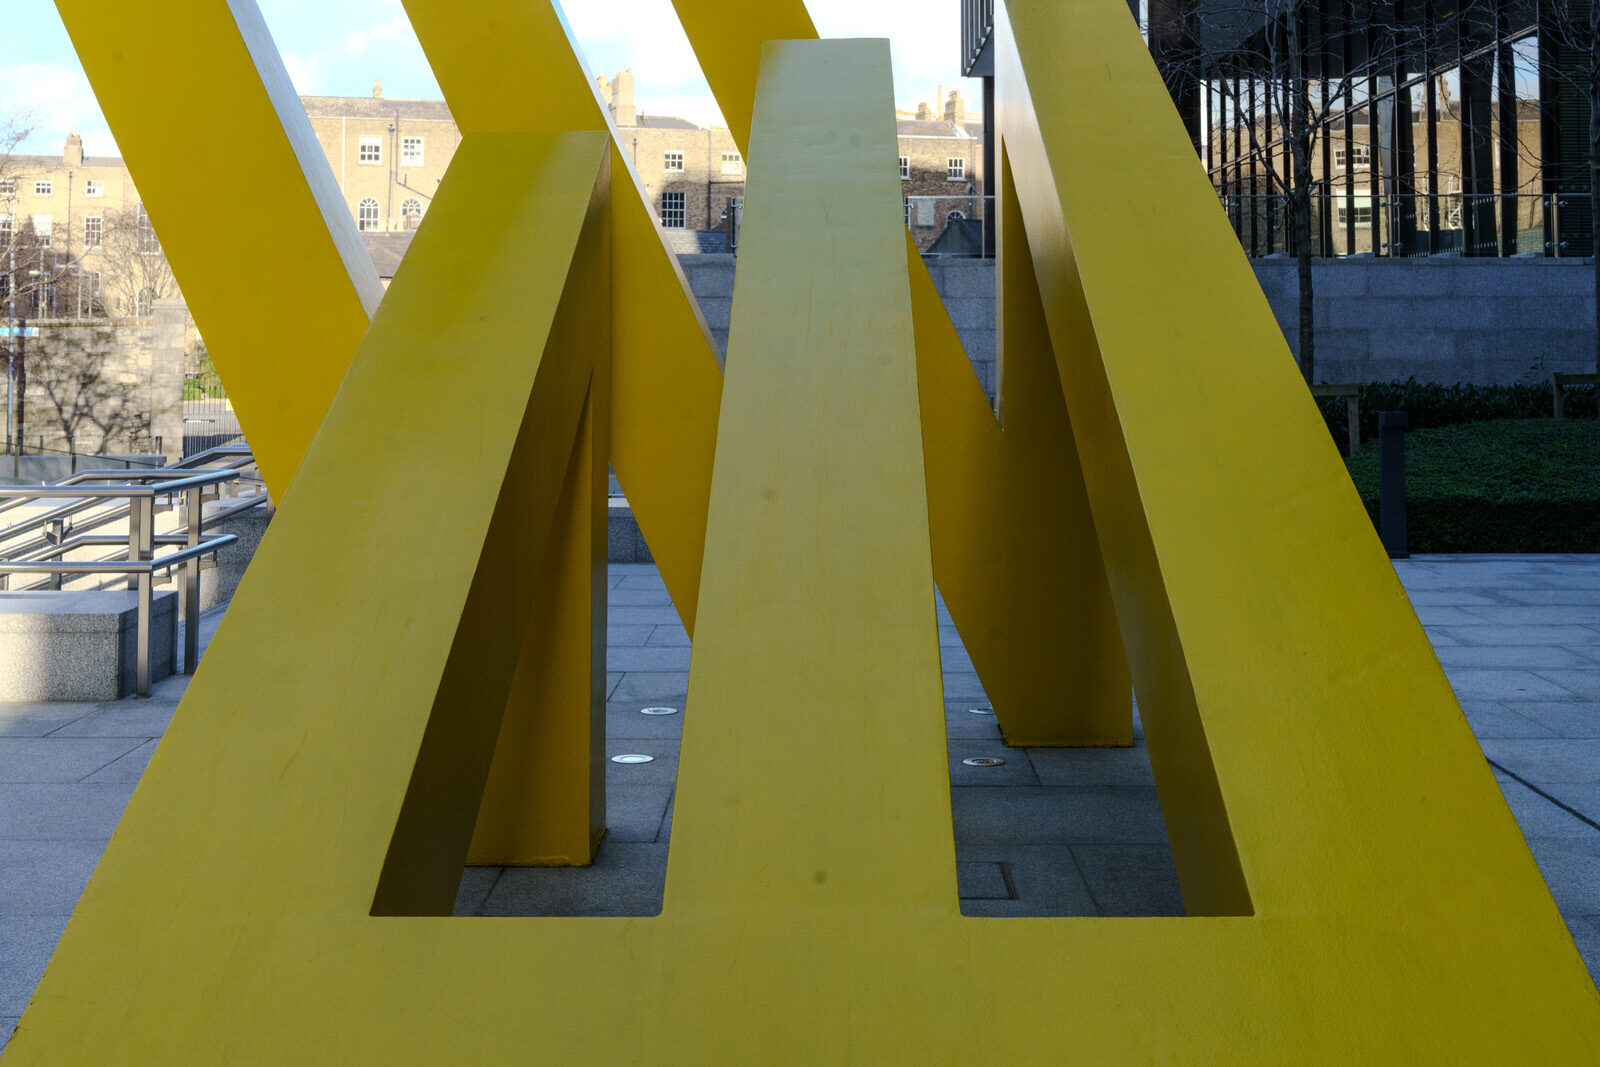 SCULPTURE BY MICHAEL BULFIN AT MIESIAN PLAZA [YELLOW STEEL GEOMETRIC REFLECTIONS]-227861-1